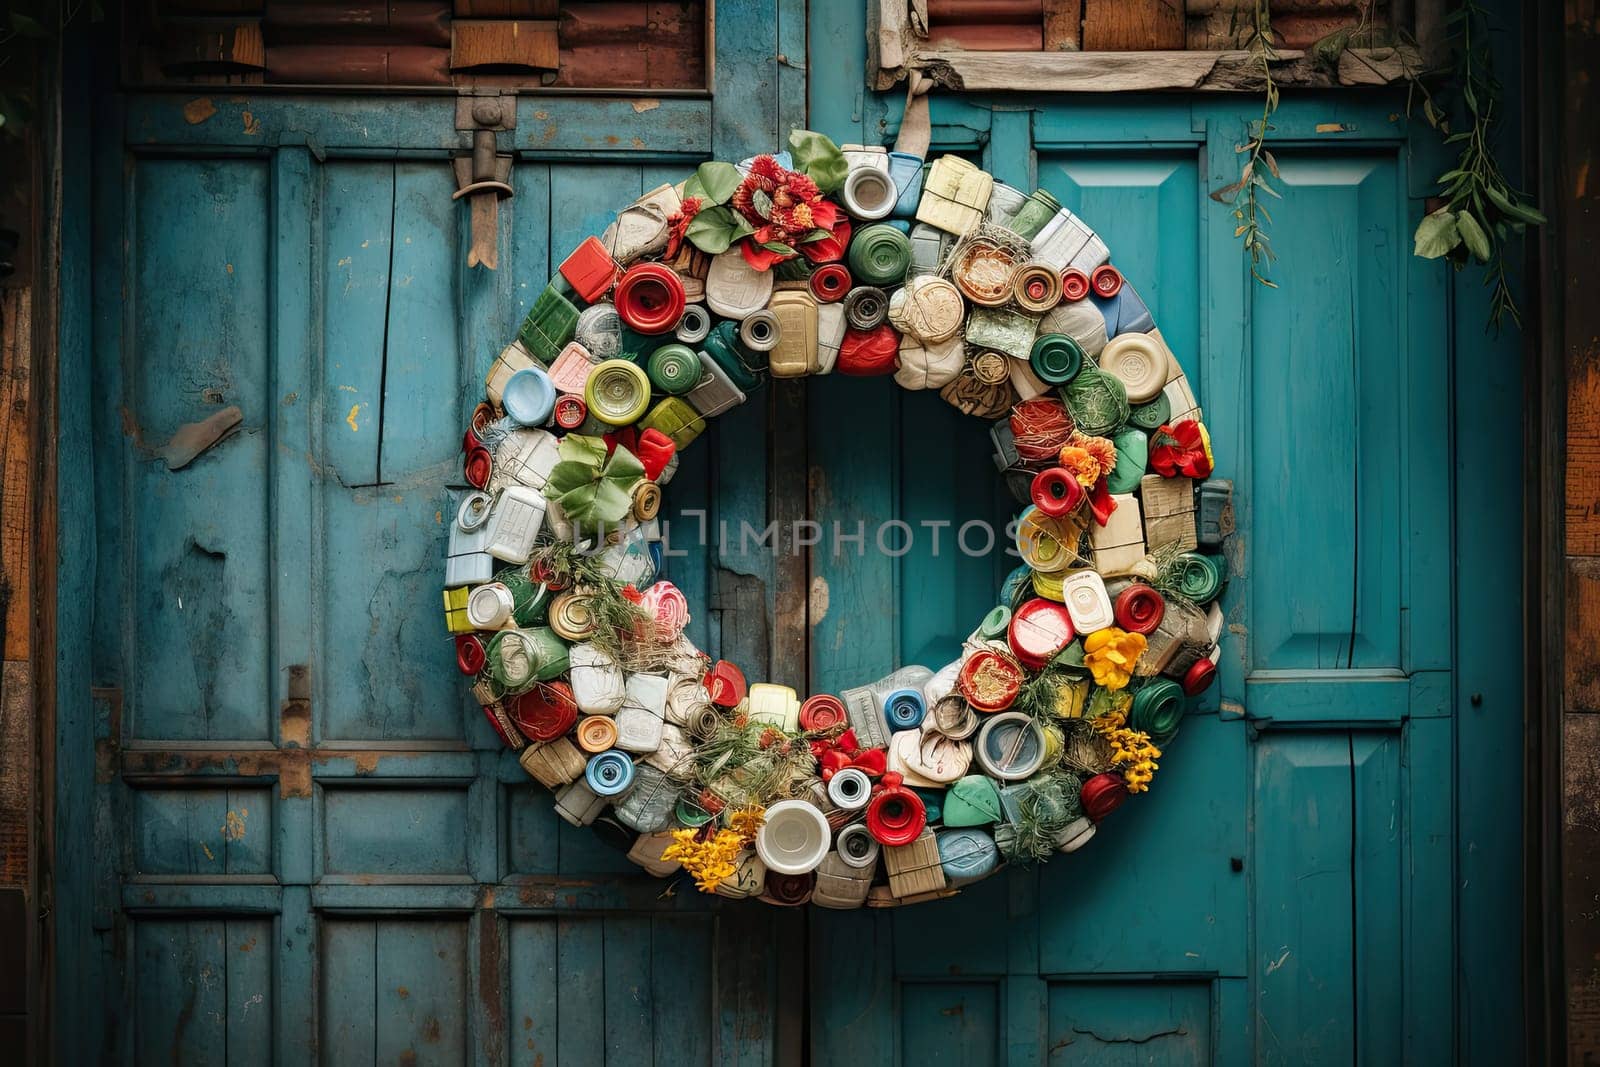 A Colorful Wreath of Bottle Caps Adorning a Vibrant Blue Door